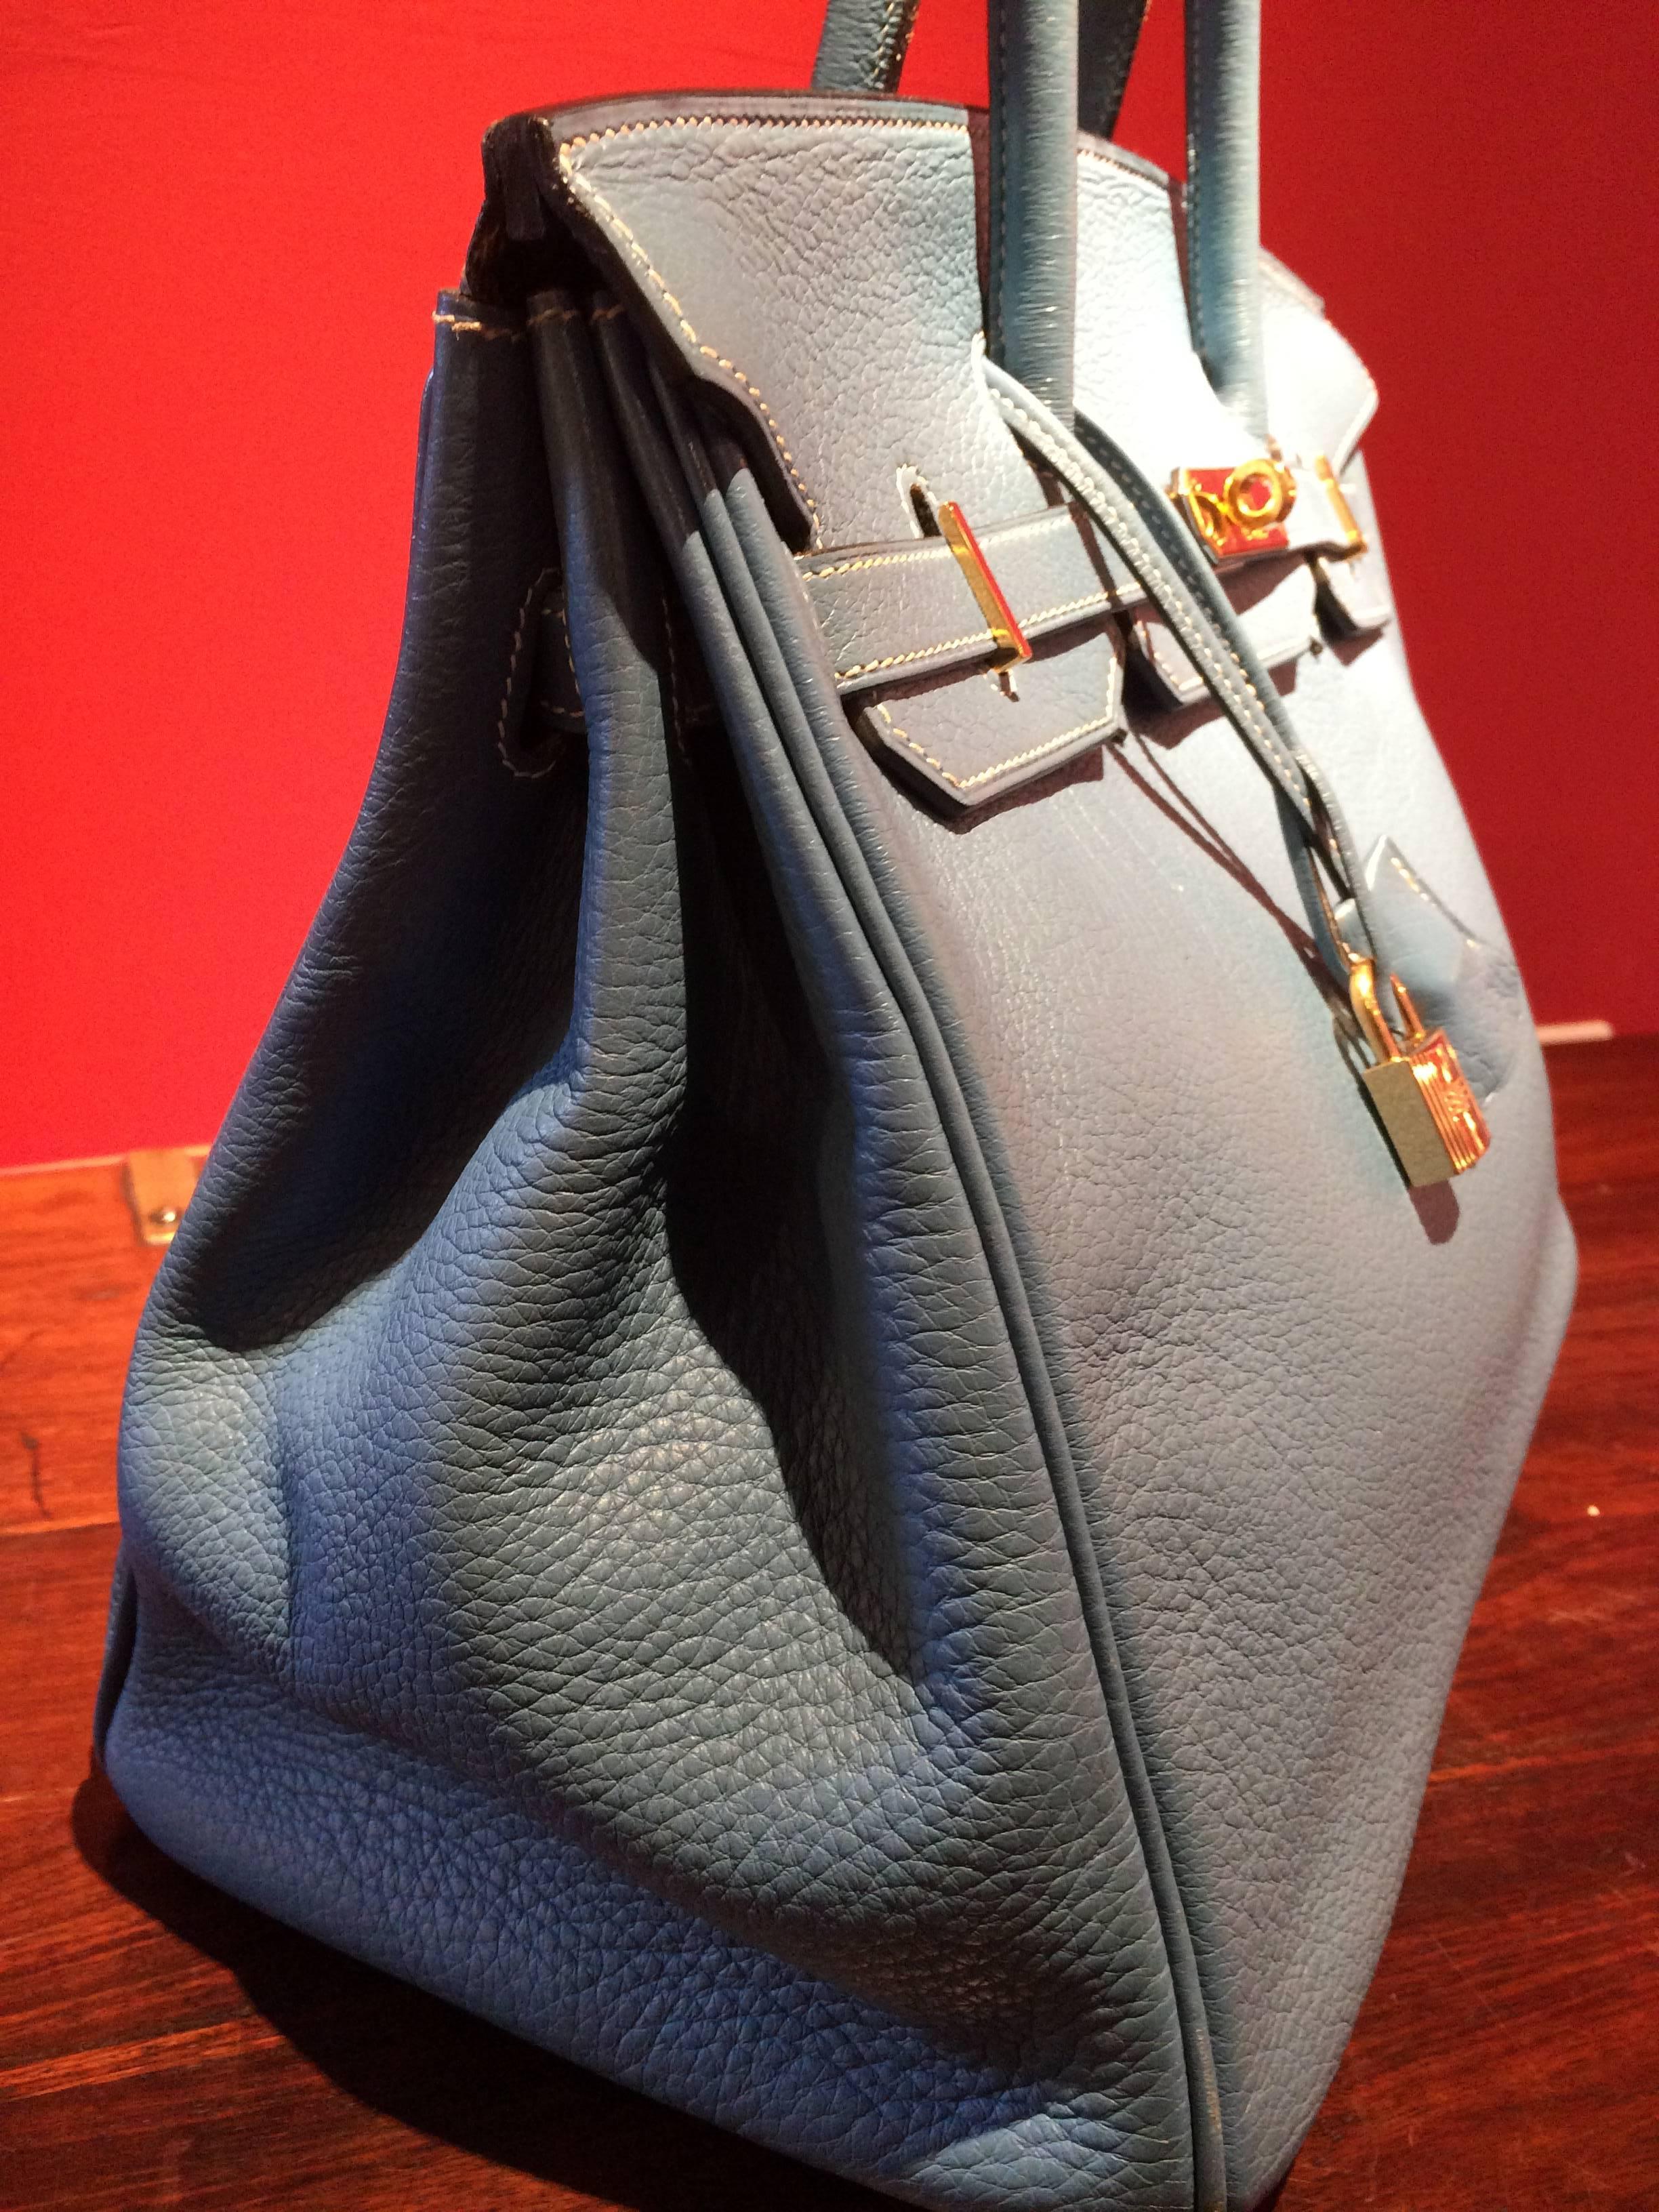 Rare Blue leather Fjord Hermes Birkin 30" bag. 
Comes with lock and key.
White detail stitching.
Comes with original dust bag, orange box and orange bag.

